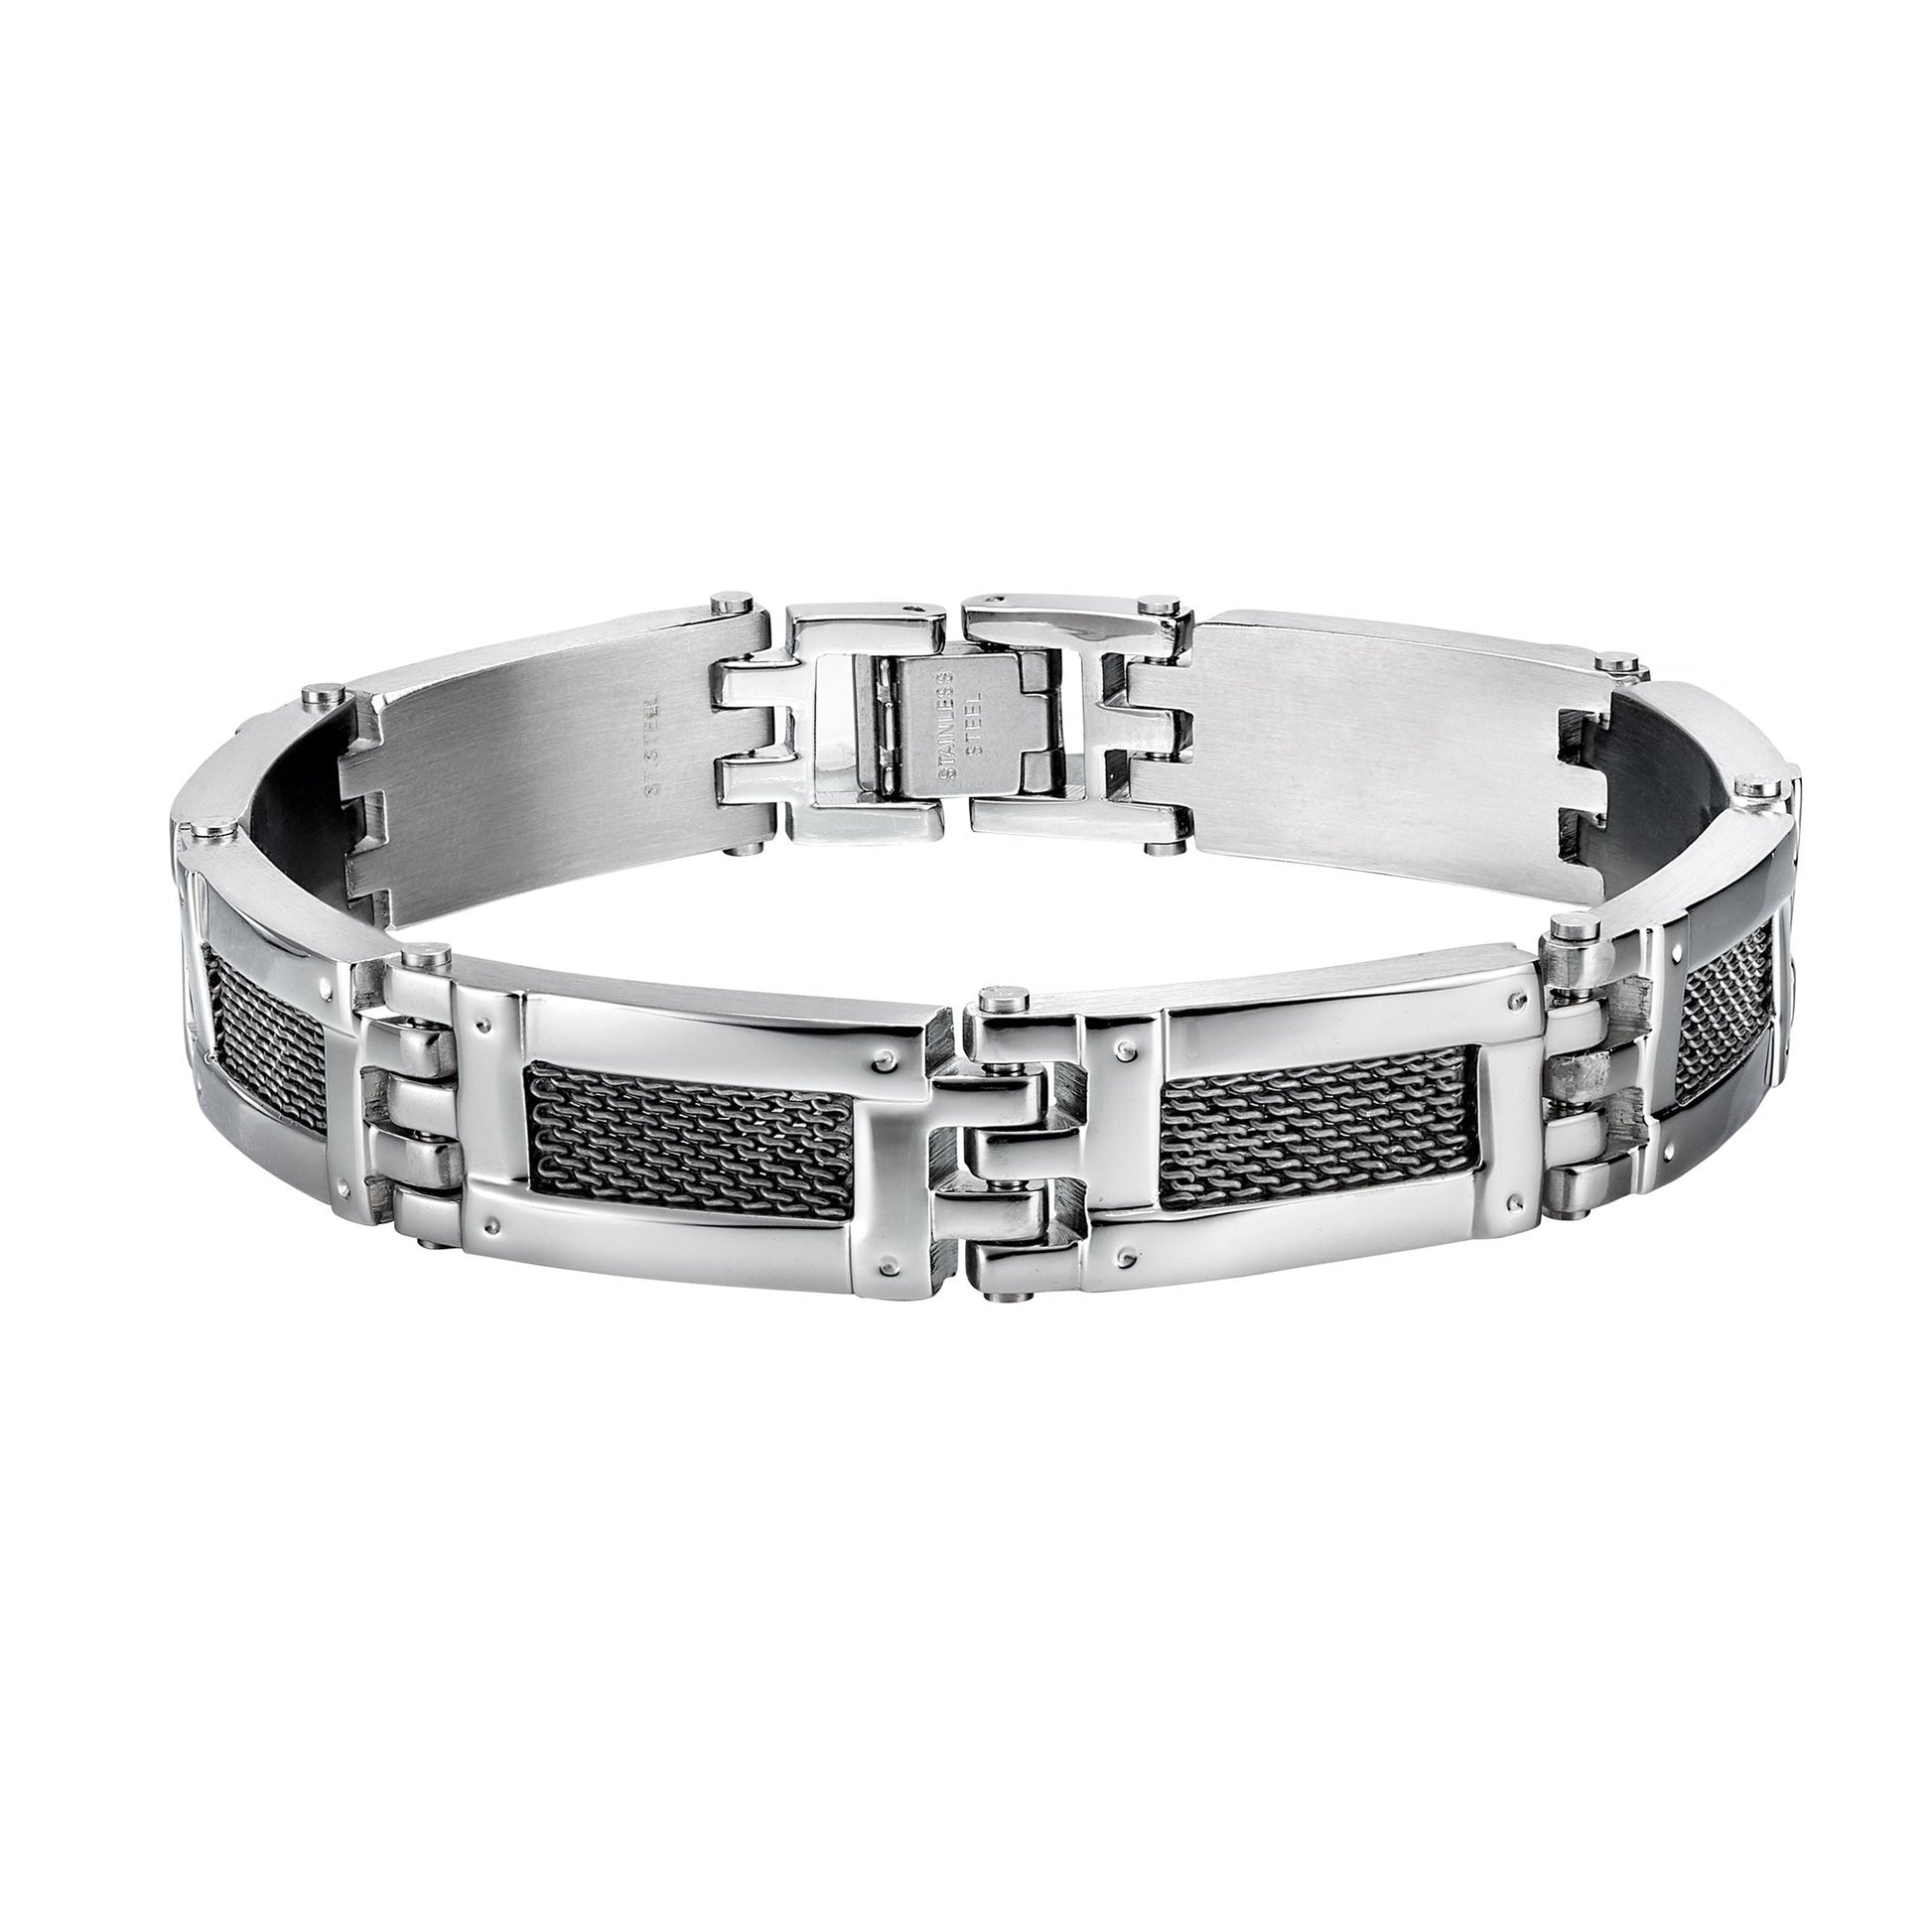 A mesh insert stainless steel men's bracelet displayed on a neutral white background.